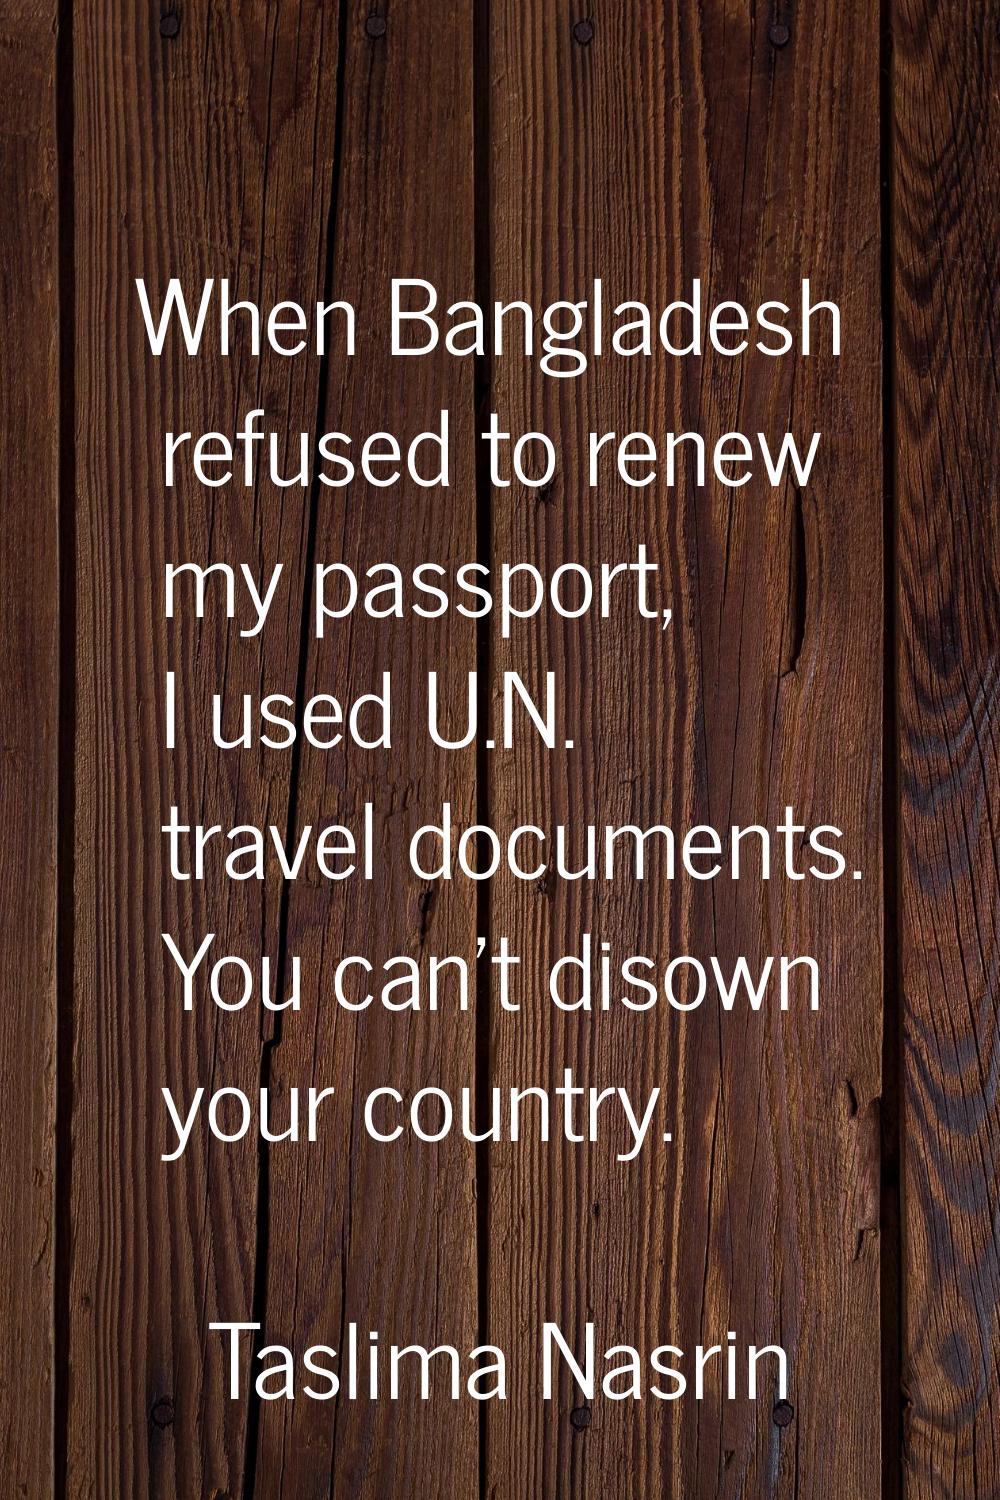 When Bangladesh refused to renew my passport, I used U.N. travel documents. You can't disown your c